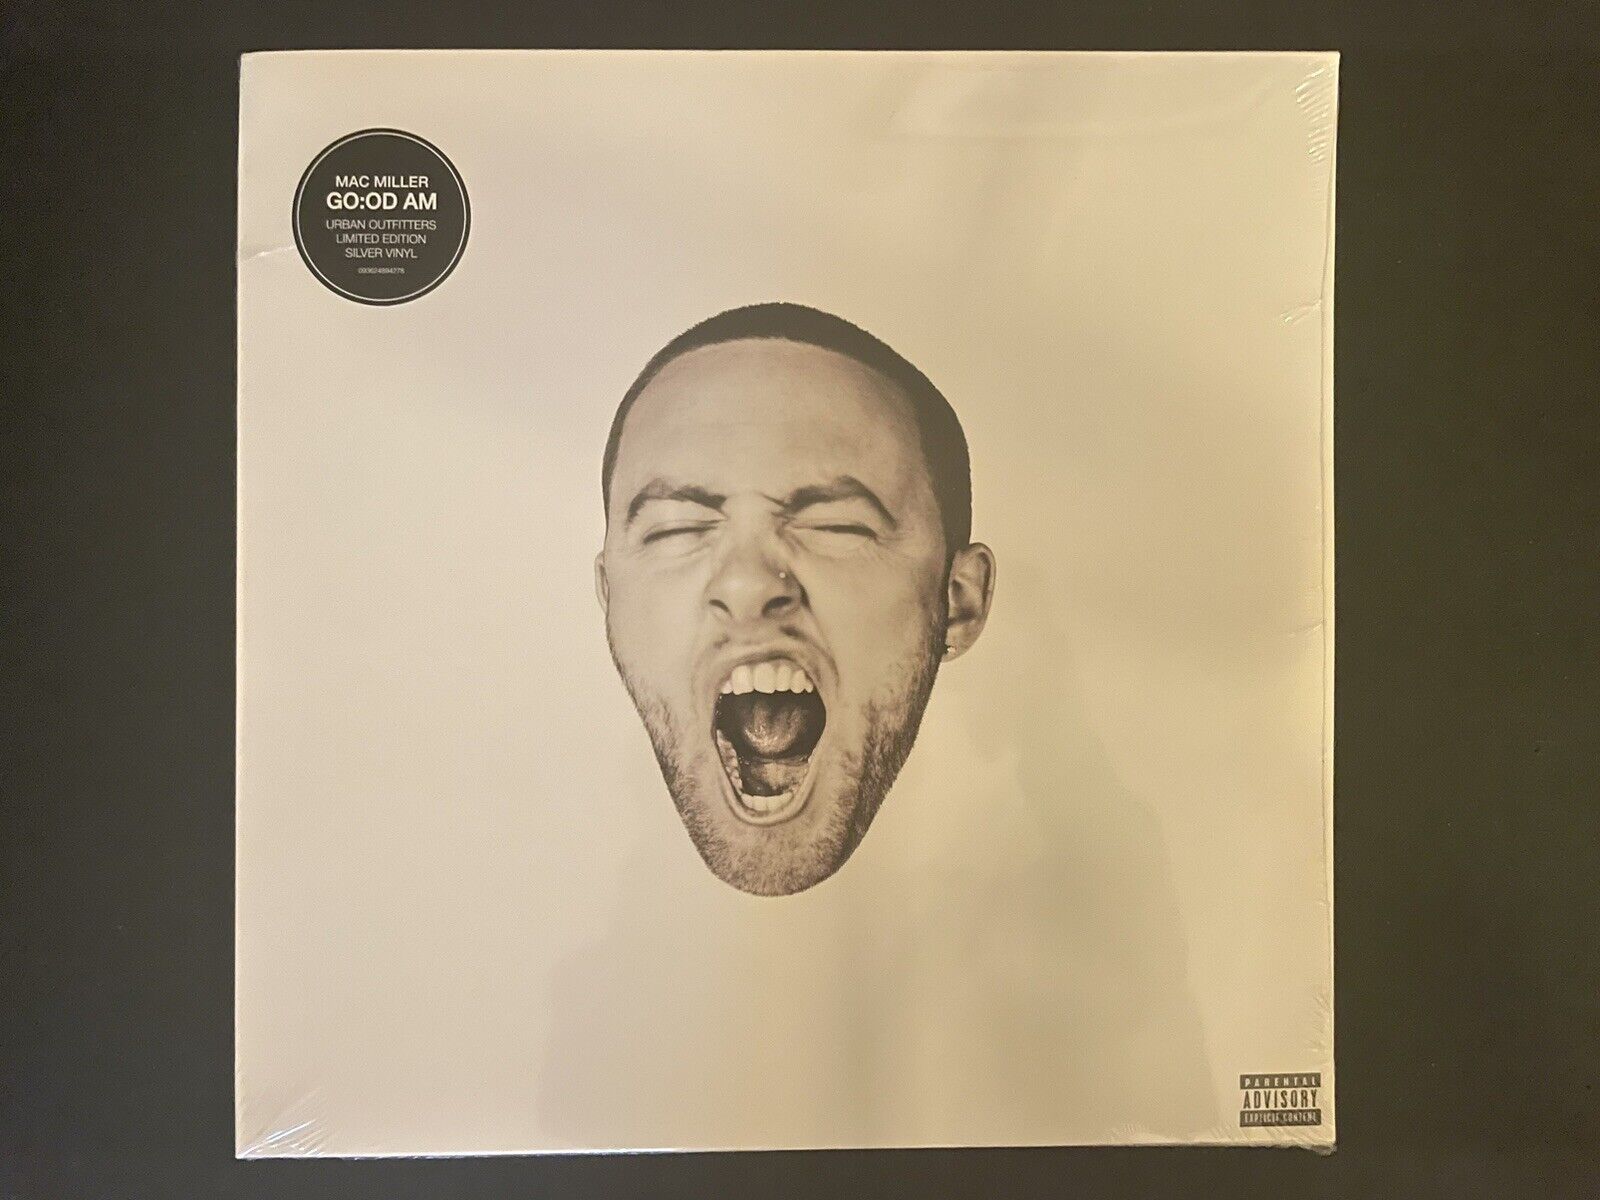 New Mac Miller Go:od AM Urban Outfitters UO Silver Color Vinyl GOOD AM KIDS